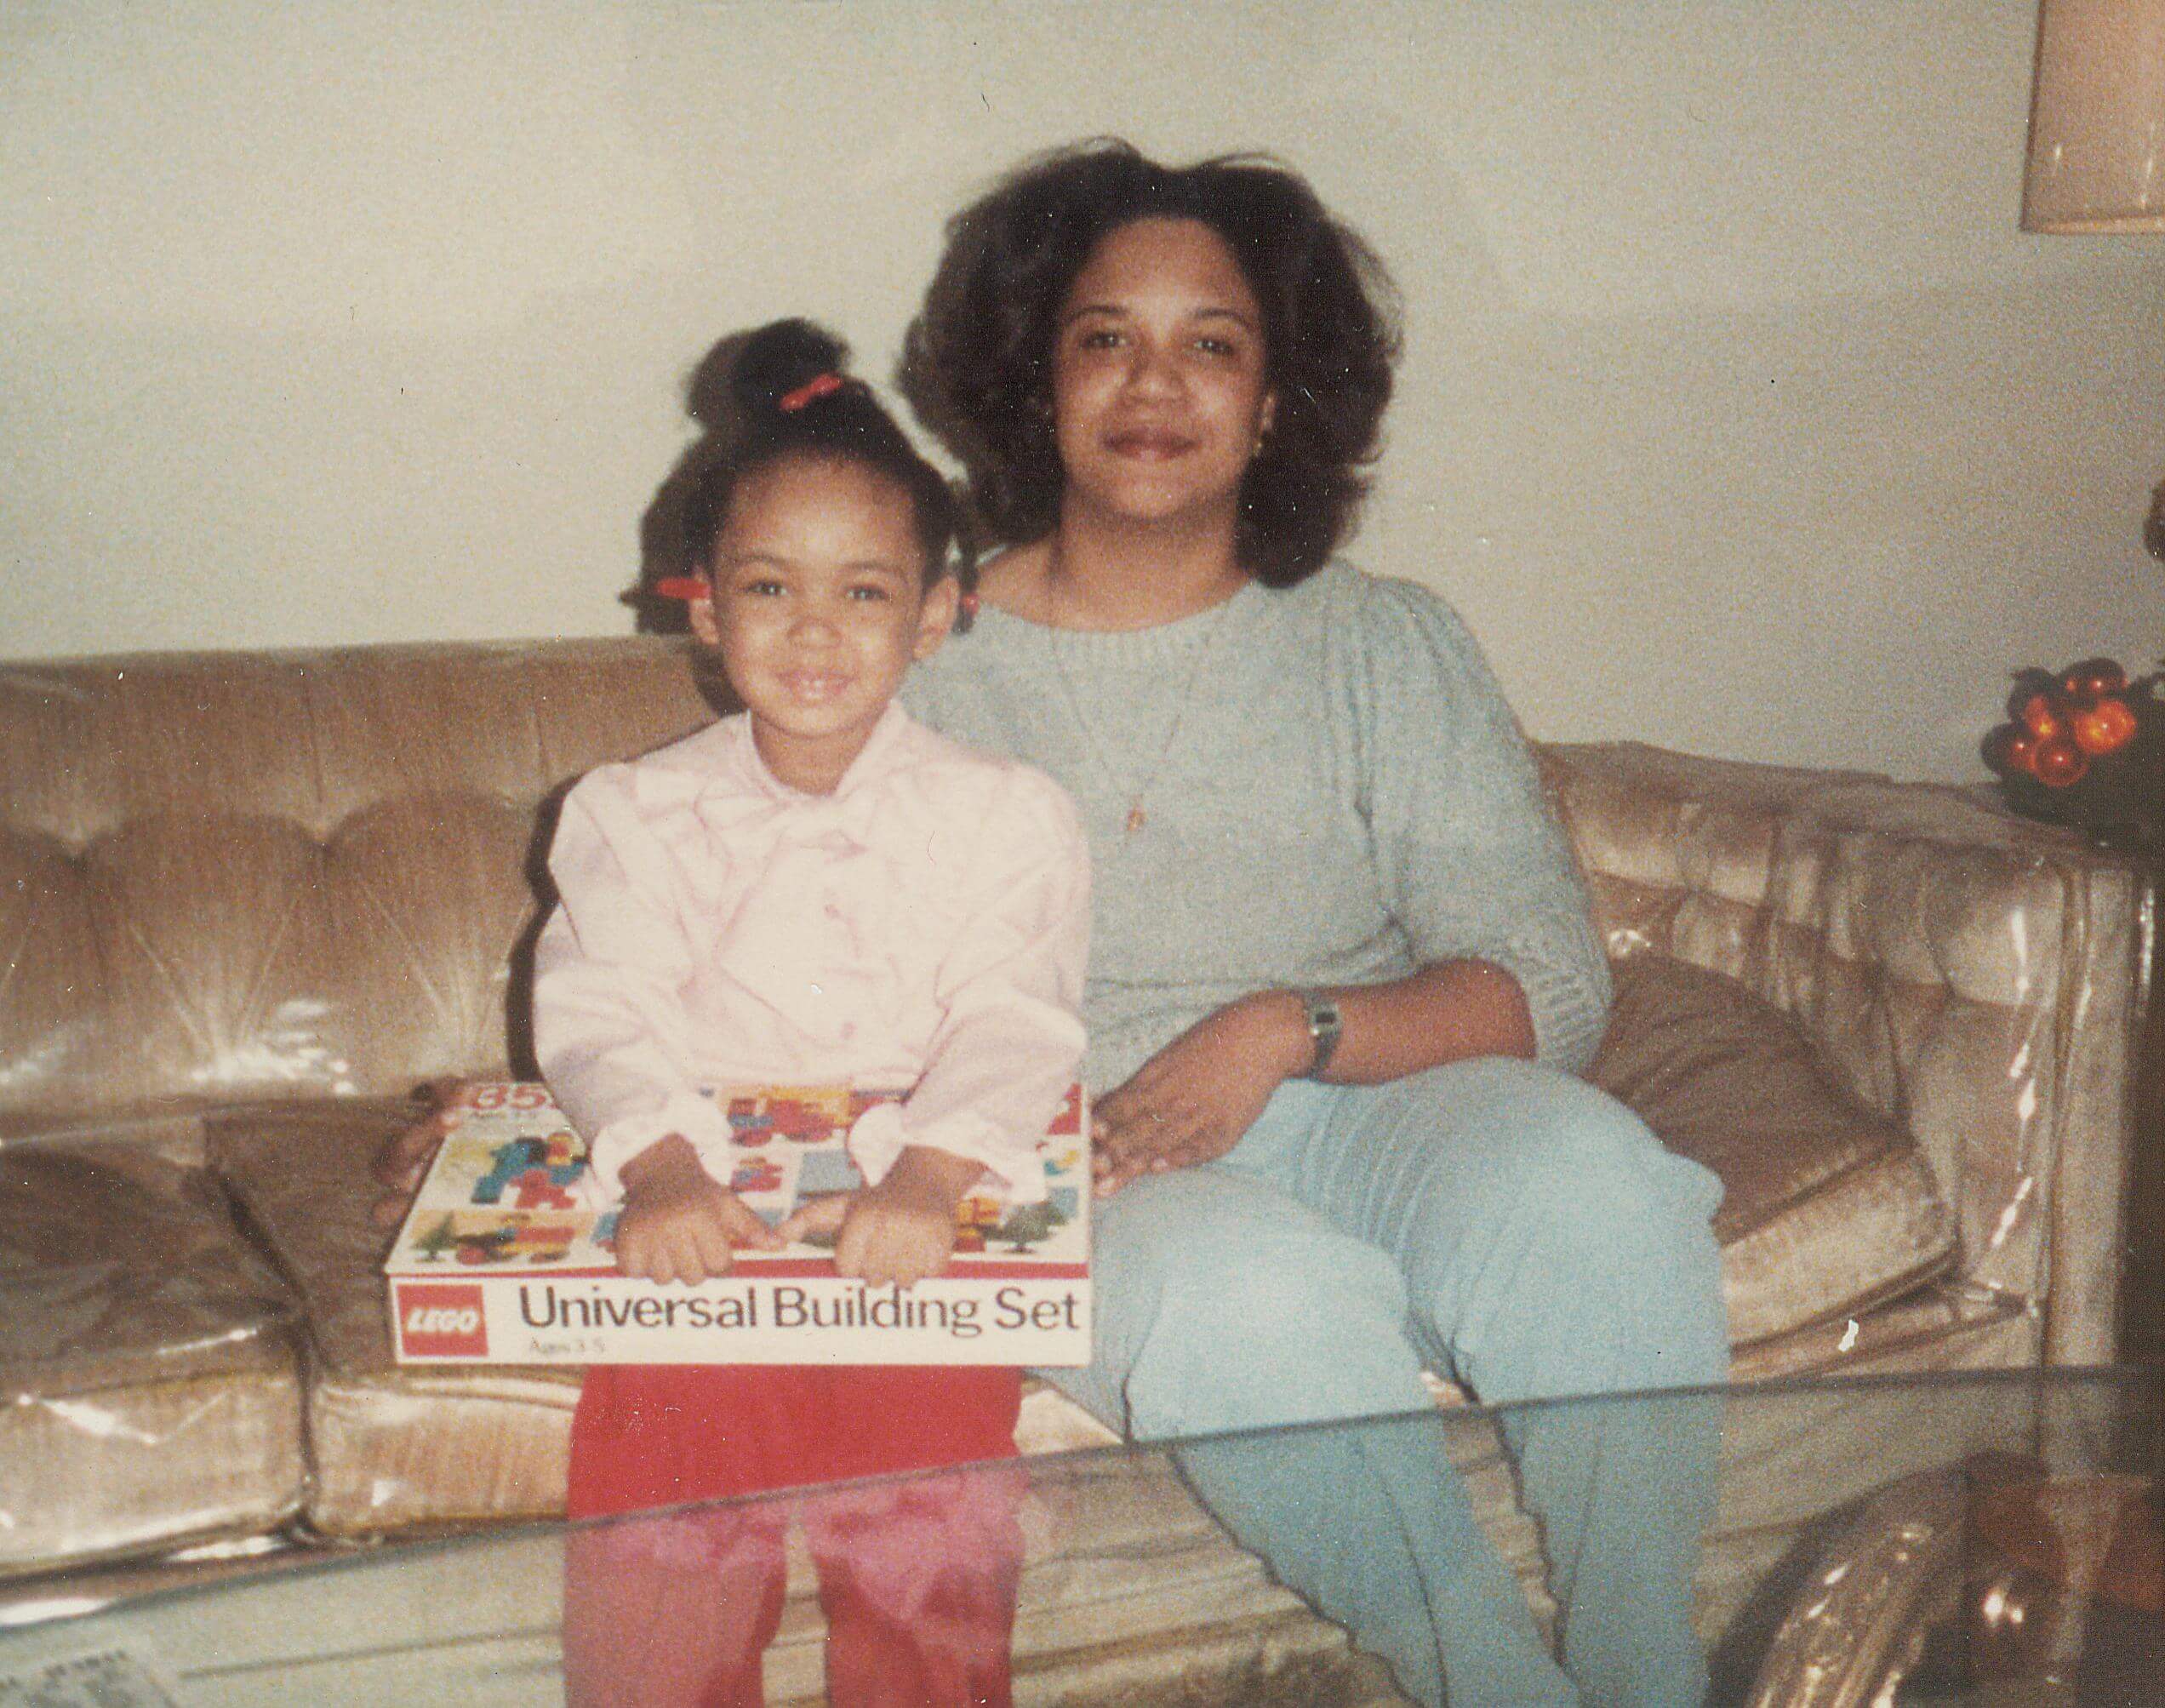 A woman and a young girl are sitting on a sofa and both smile at the camera. The girl has a box with a game on her lap.